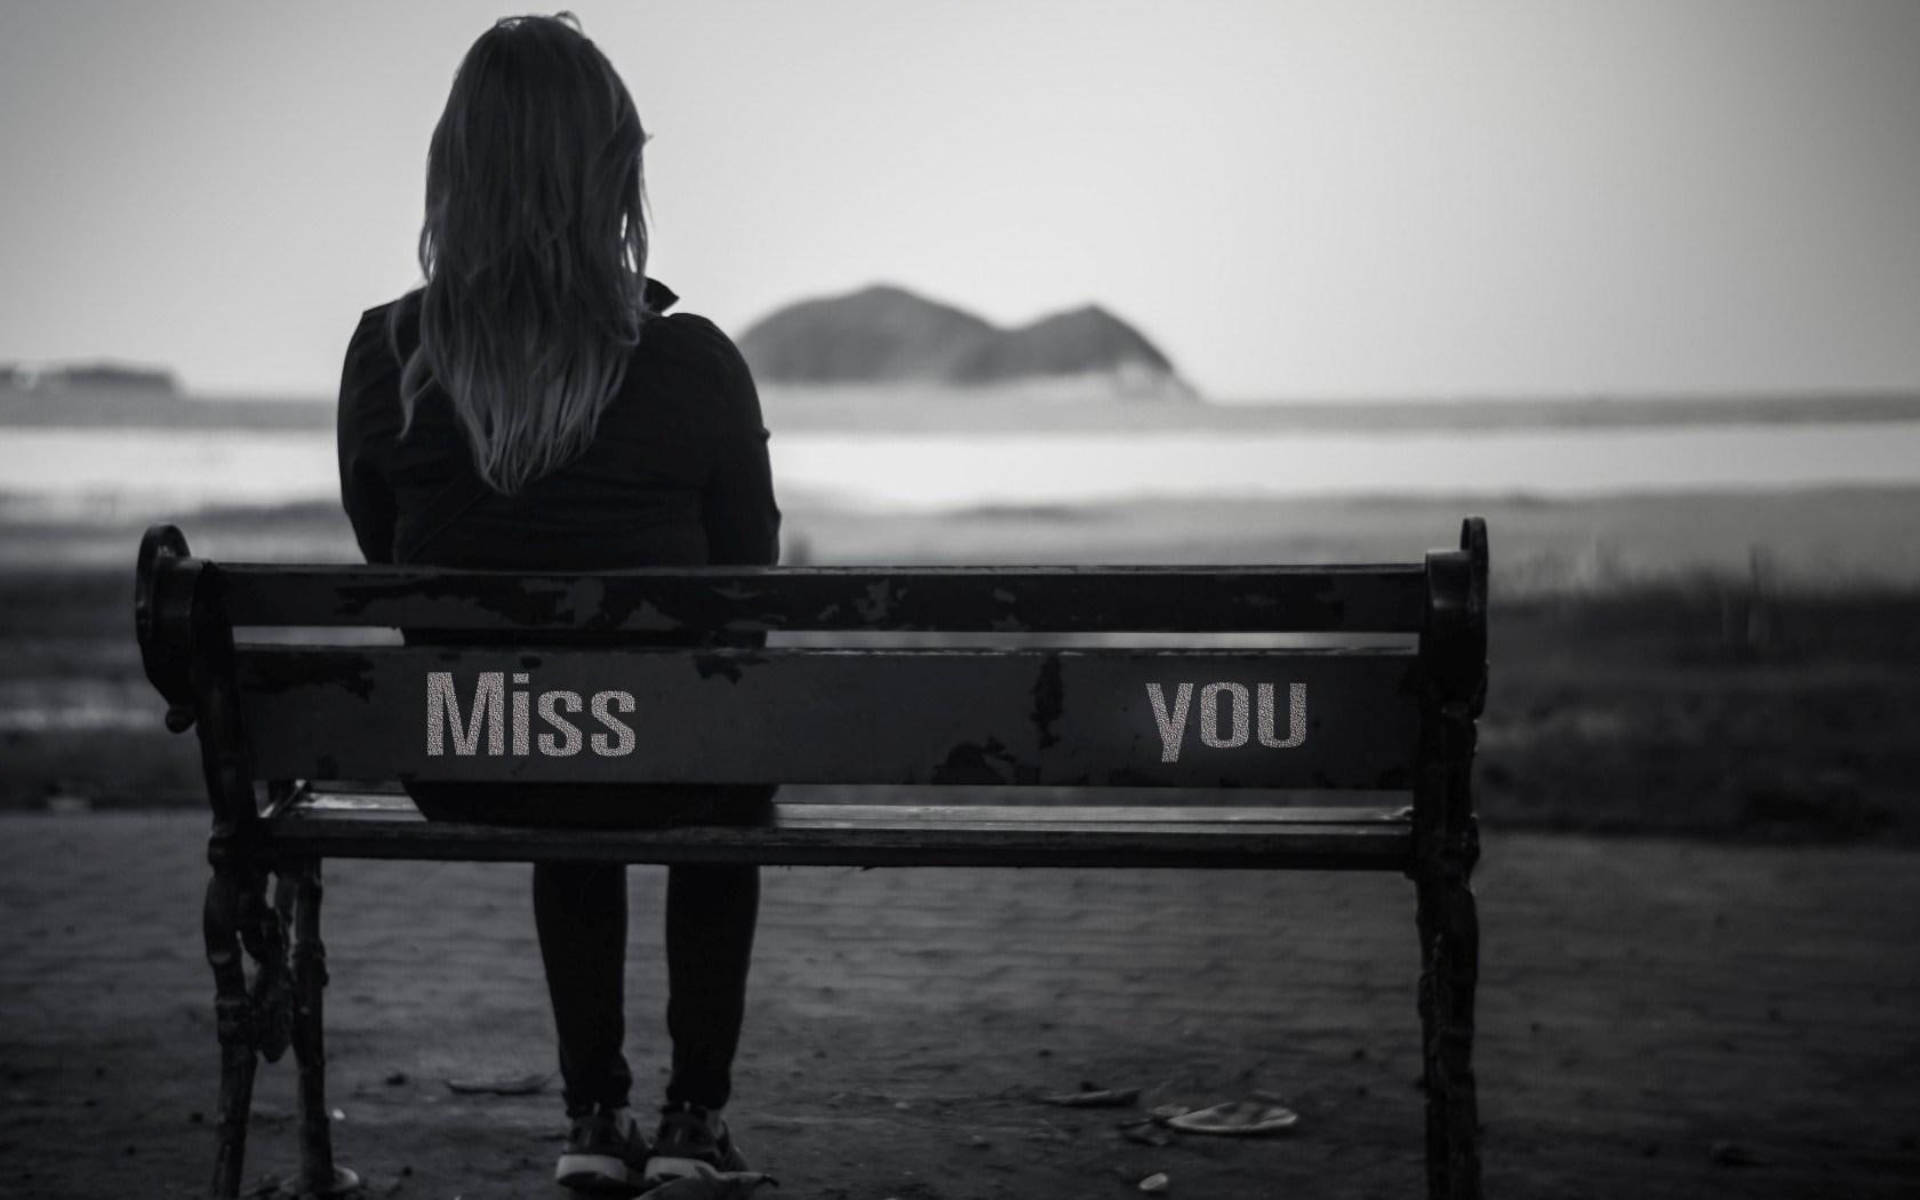 Missing You Alone On Bench Wallpaper